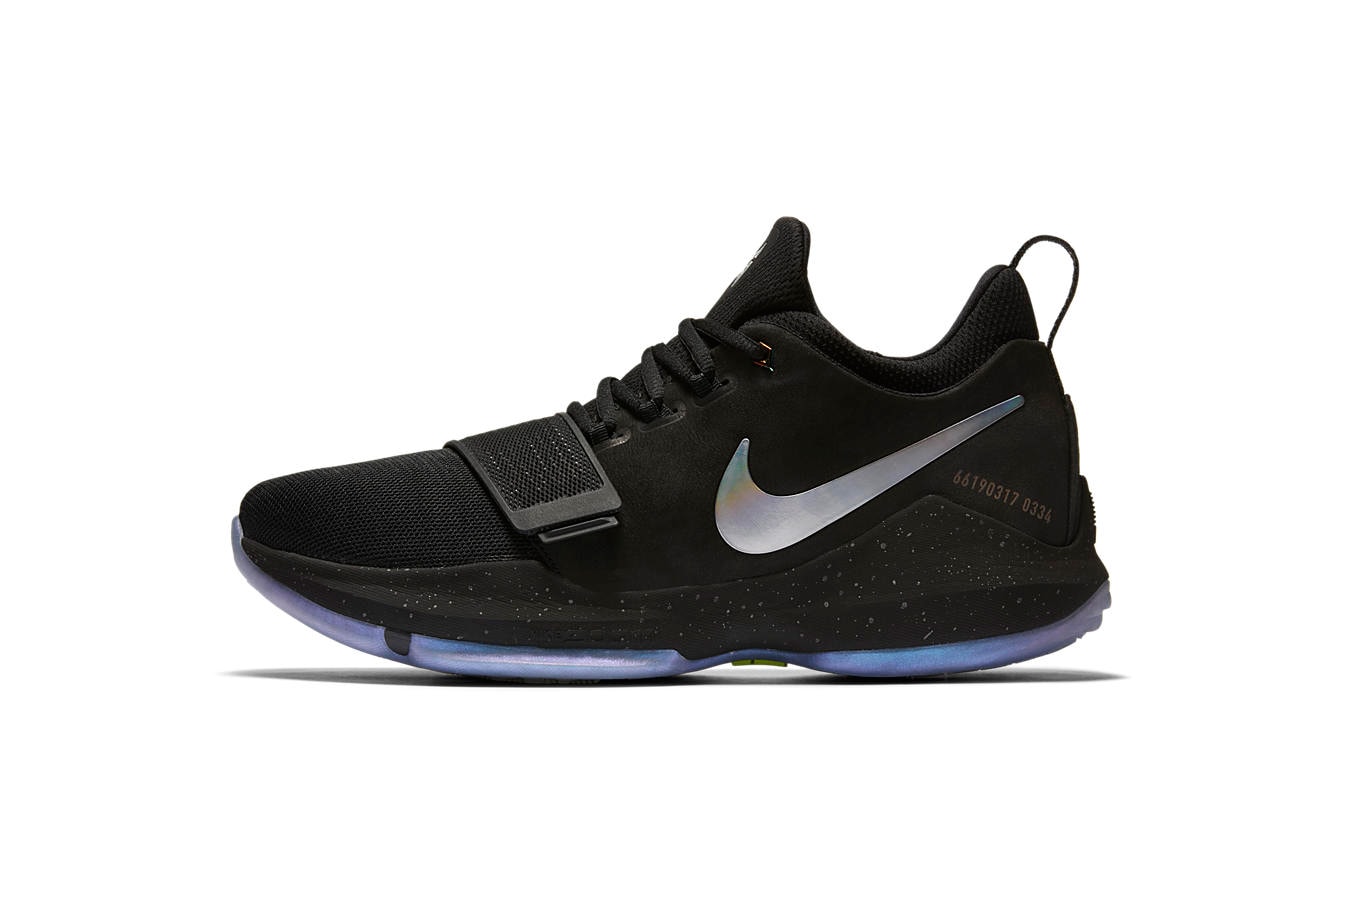 Nike PG1 Paul George Shoes - Detailed Info